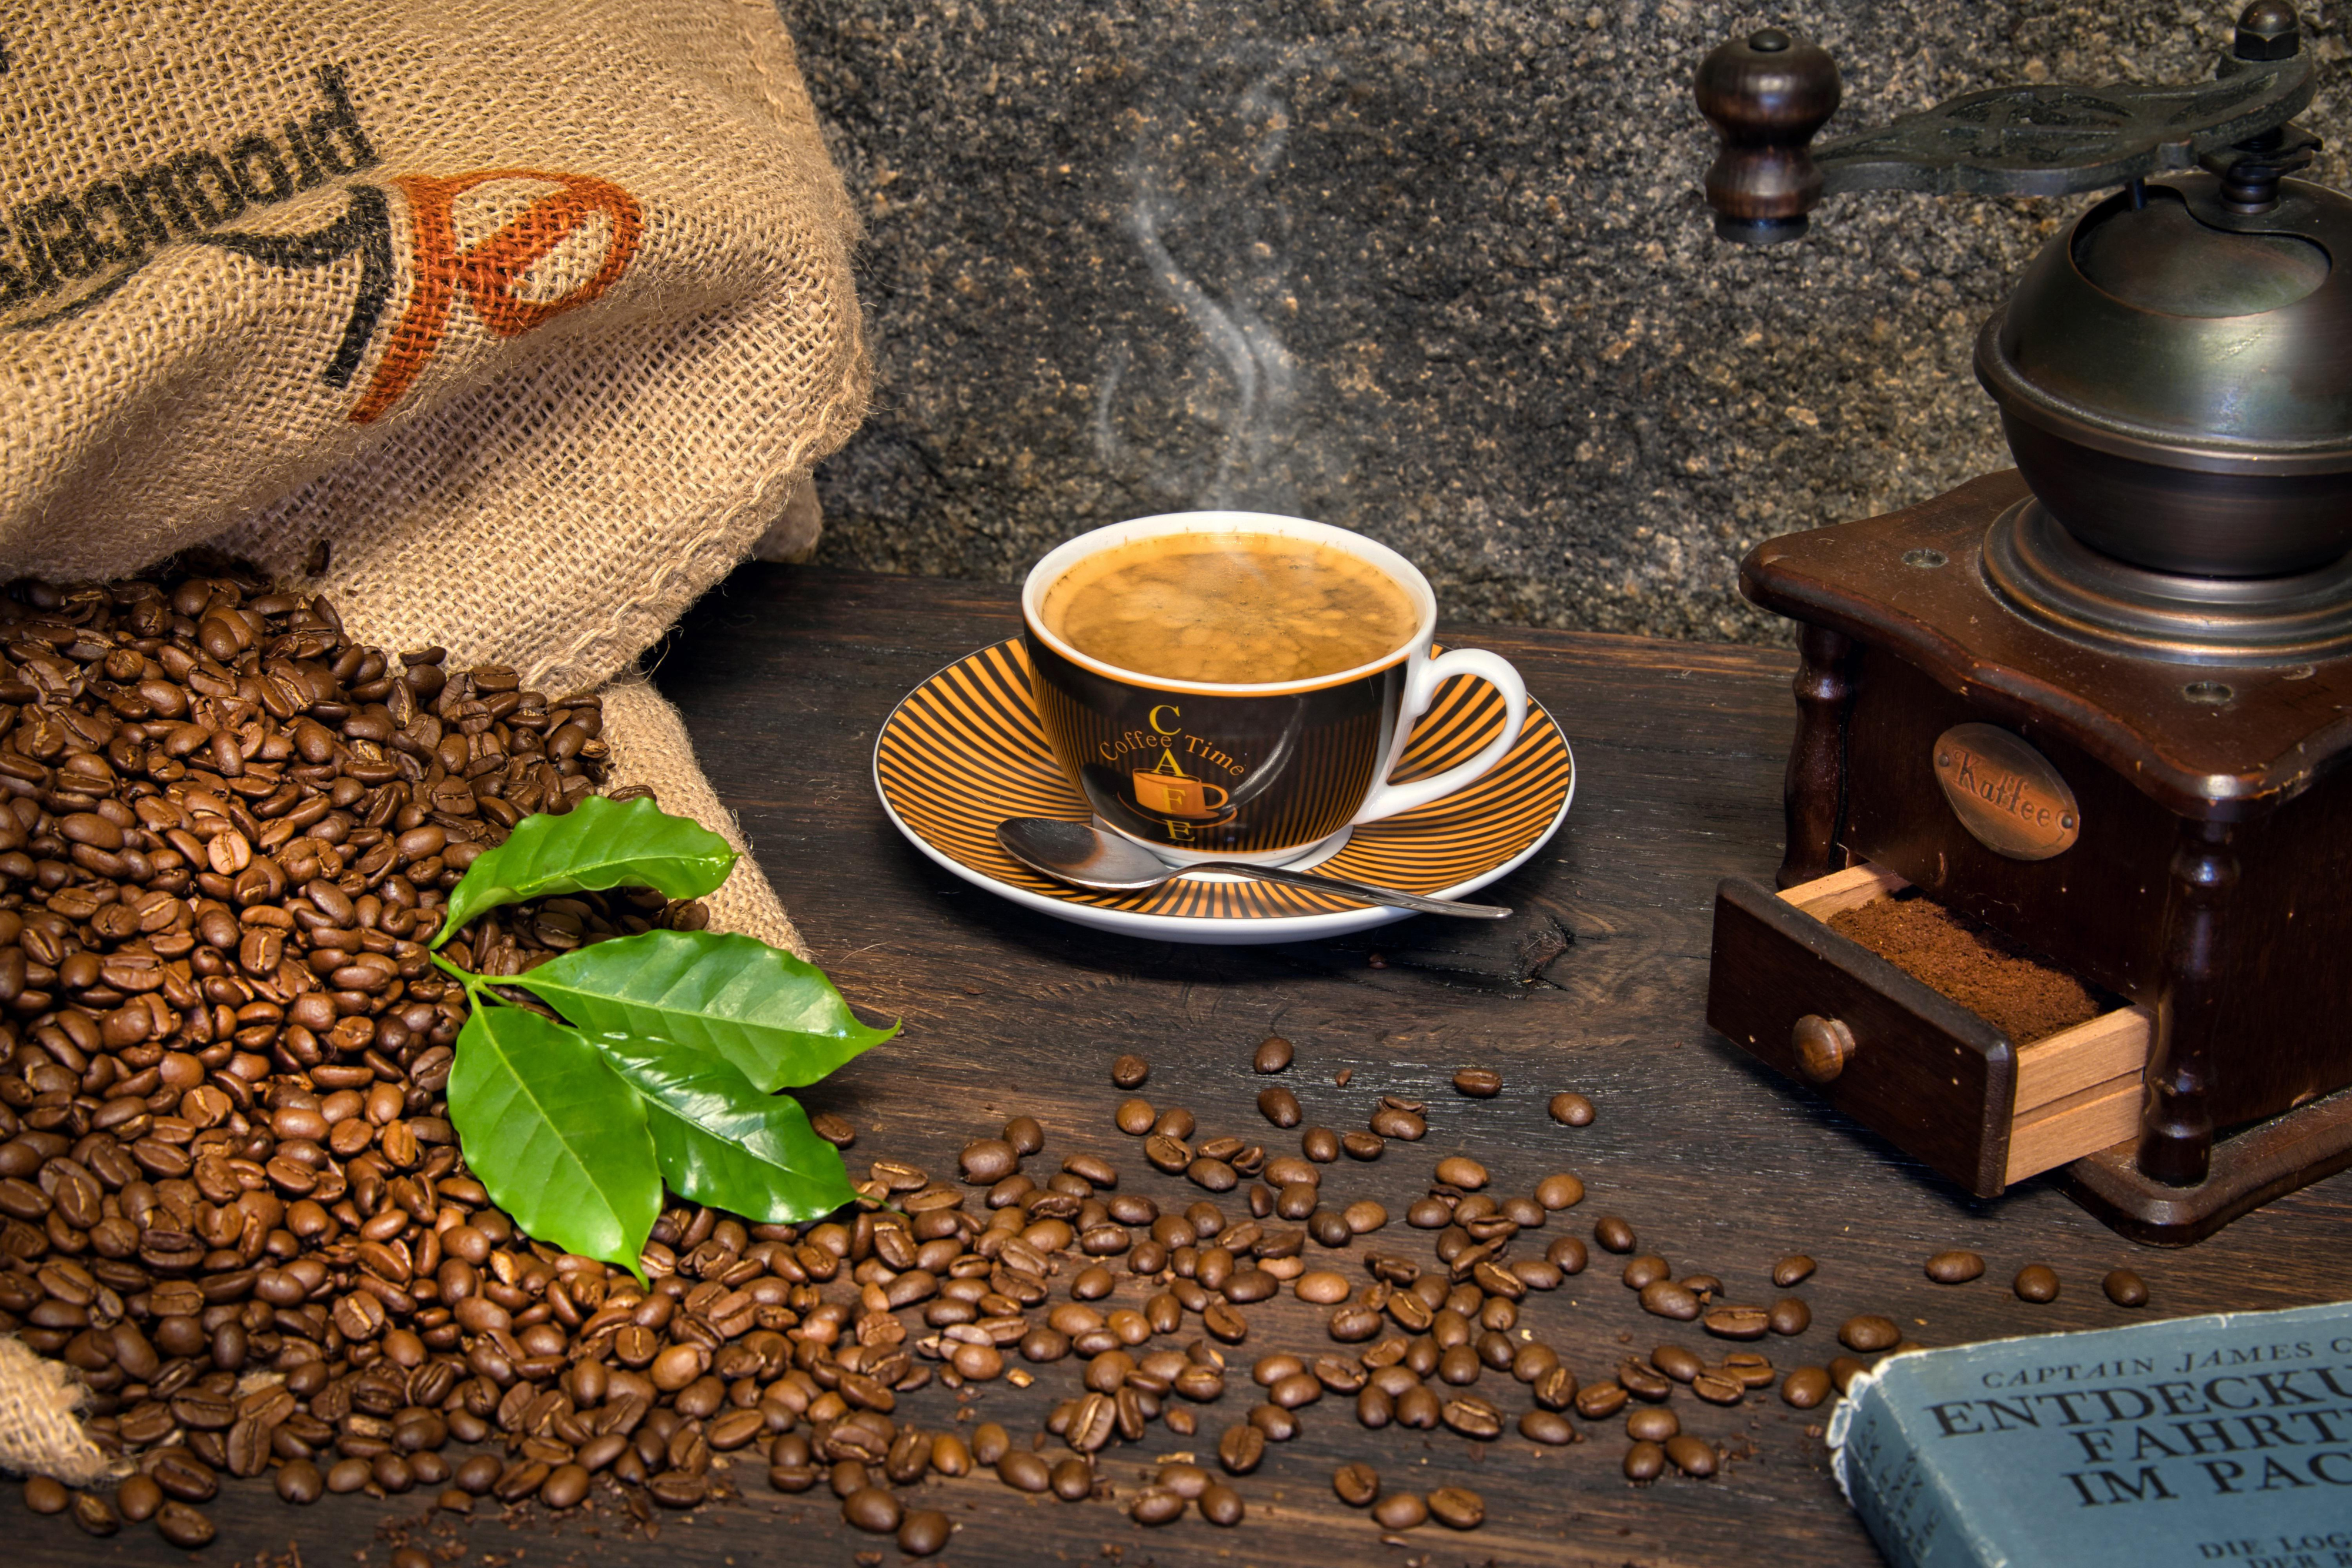 Coffee Aesthetic Wallpaper - Apps on Google Play